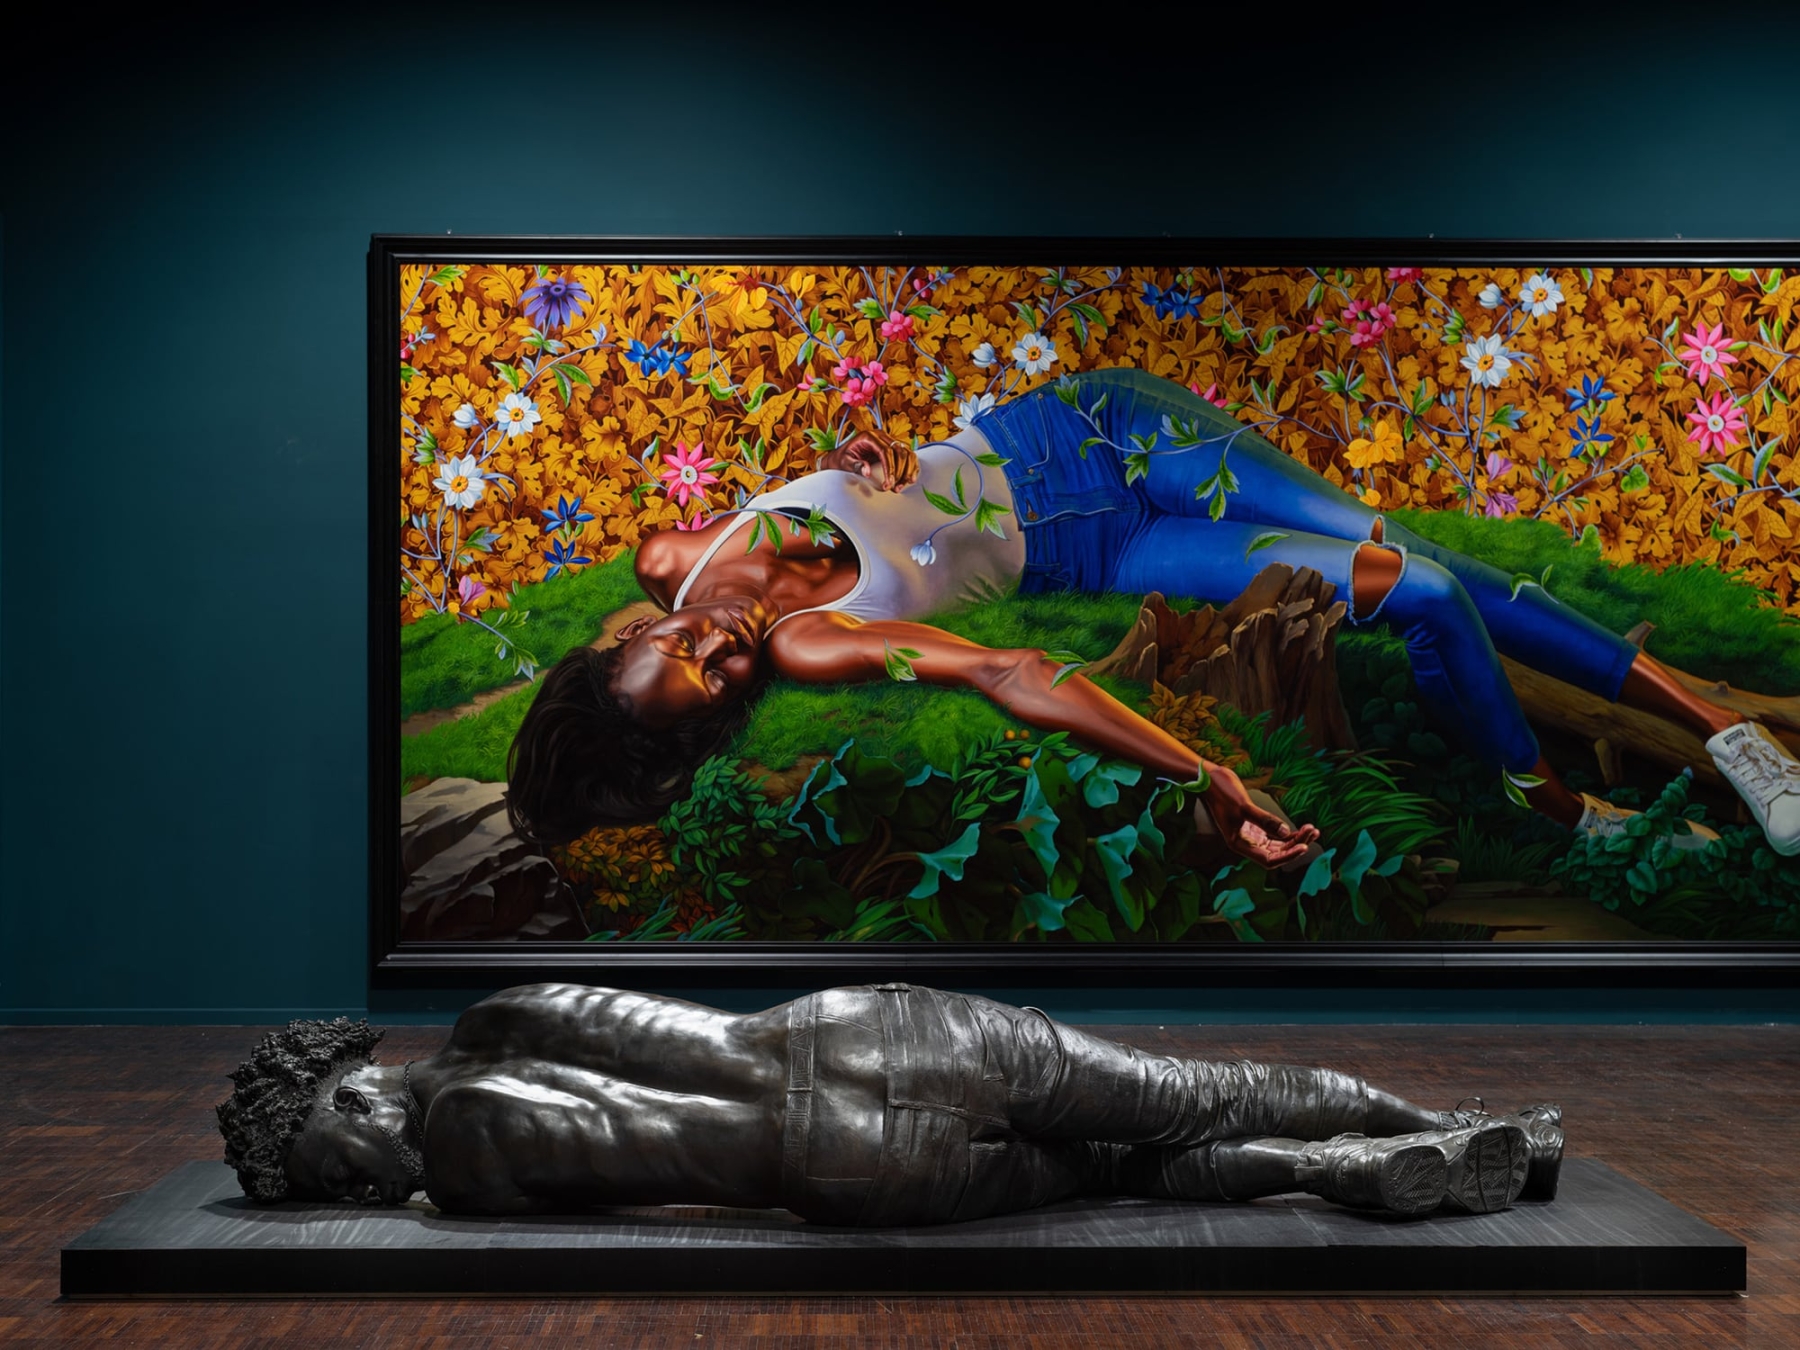 Front: &ldquo;The Virgin Martyr Cecilia&rdquo; (2022), bronze, 251 &times; 152 3/4 &times; 70 1/8 inches. Back: &ldquo;Young Tarentine II (Ndeye Fatou Mbaye)&rdquo; (2022), oil on canvas, 131 7/8 &times; 300 inches